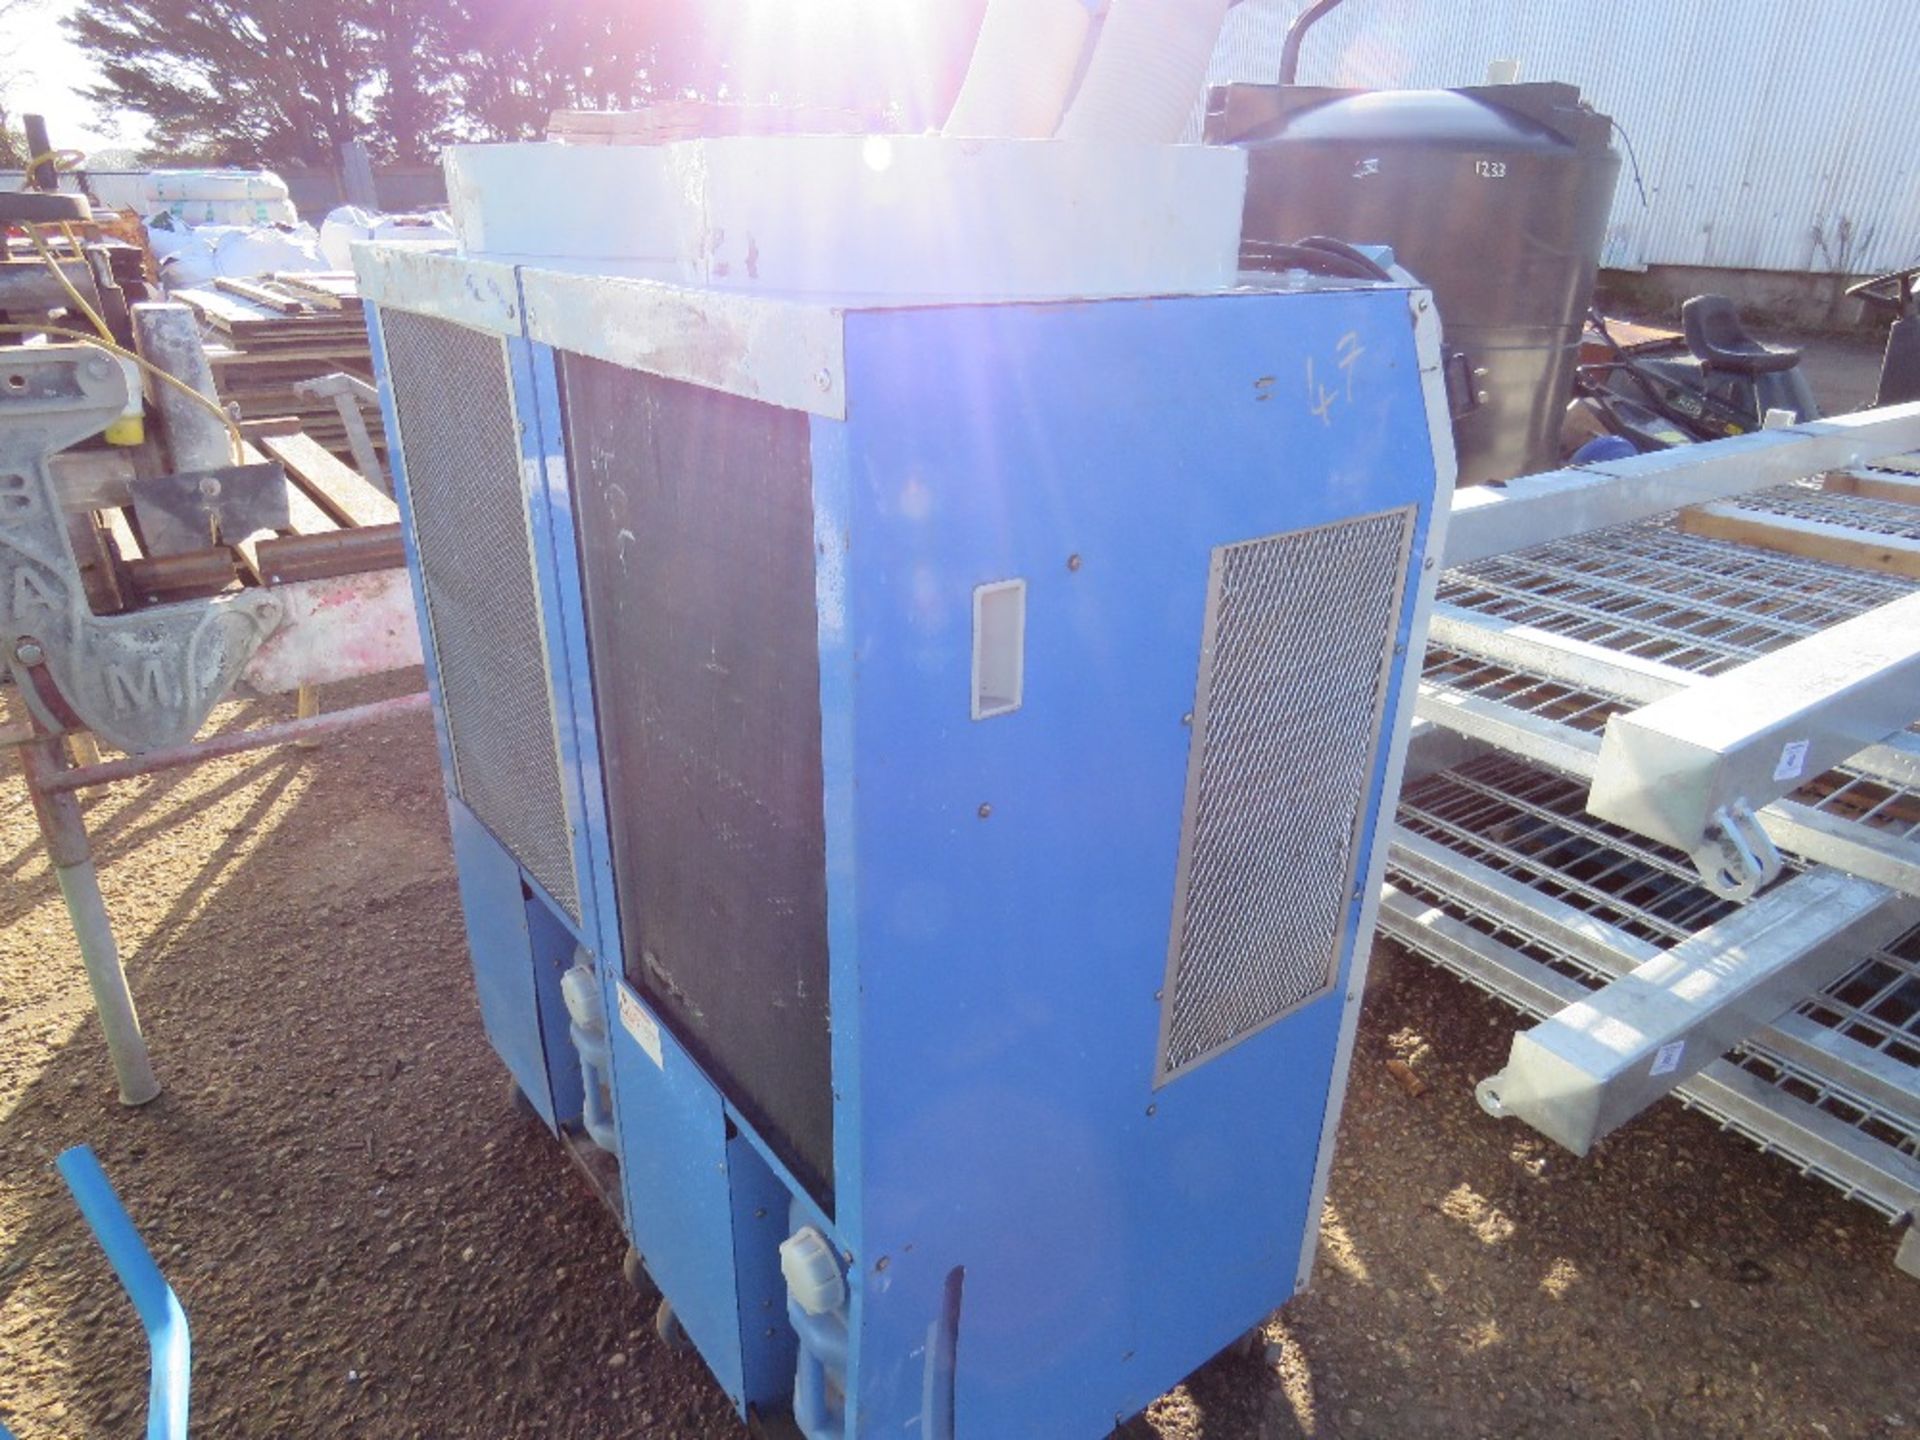 2 X AIREX LARGE CAPACITY AIR CONDITIONING UNITS. CONDITION UNKNOWN. - Image 2 of 3